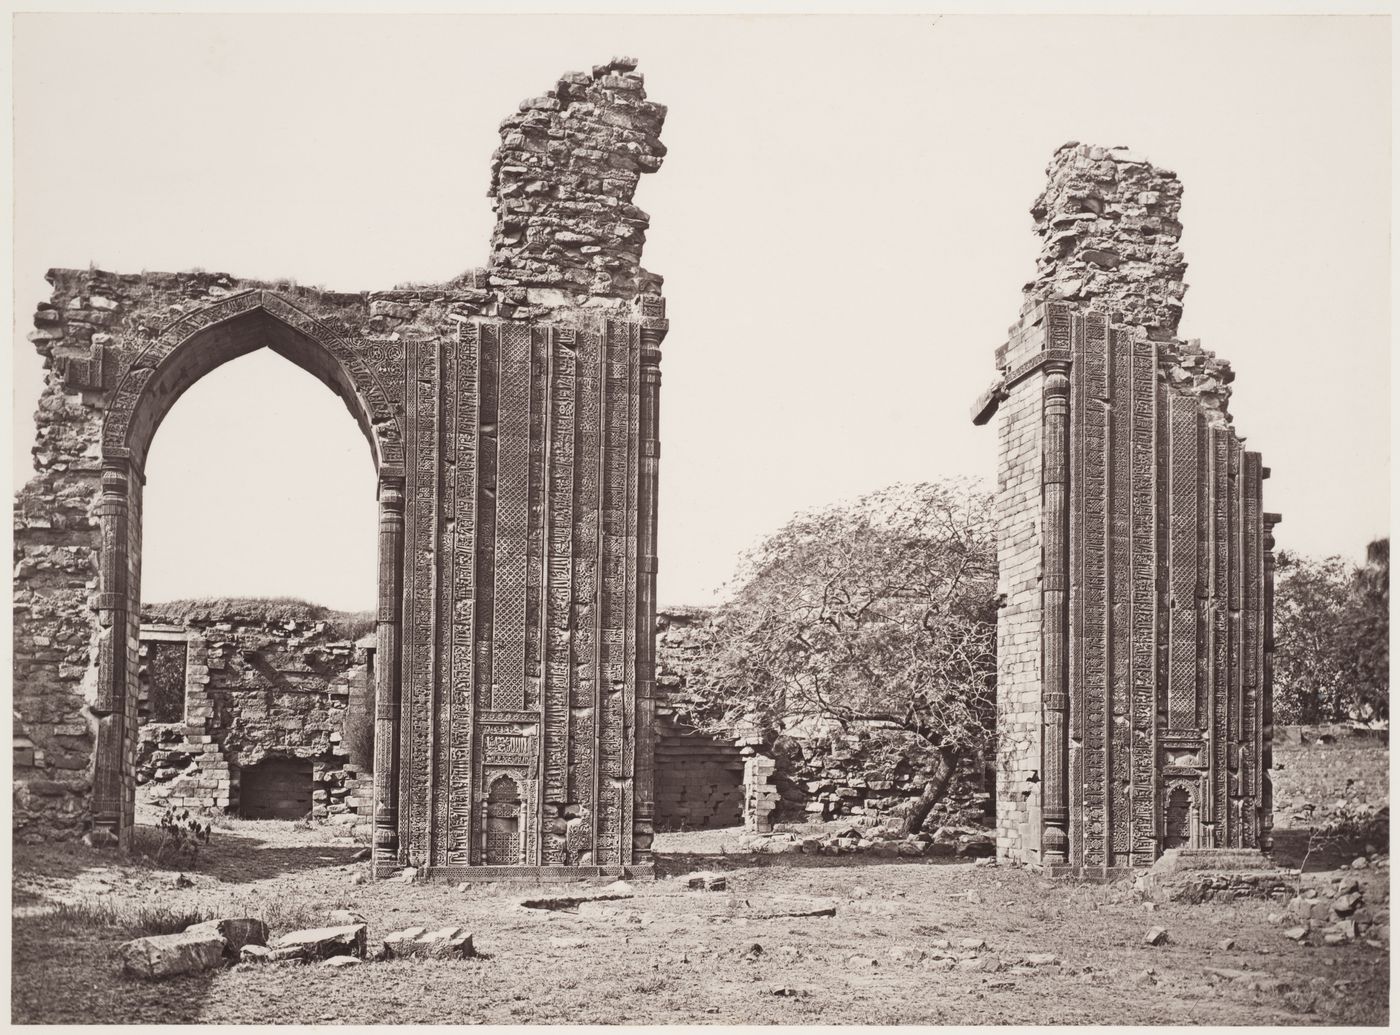 View of the north-west gateway and the arched screen façade of the Quwwat al-Islam [Might of Islam] Mosque with an unidentified building in the background, Quwwat al-Islam Mosque Complex, Delhi, India